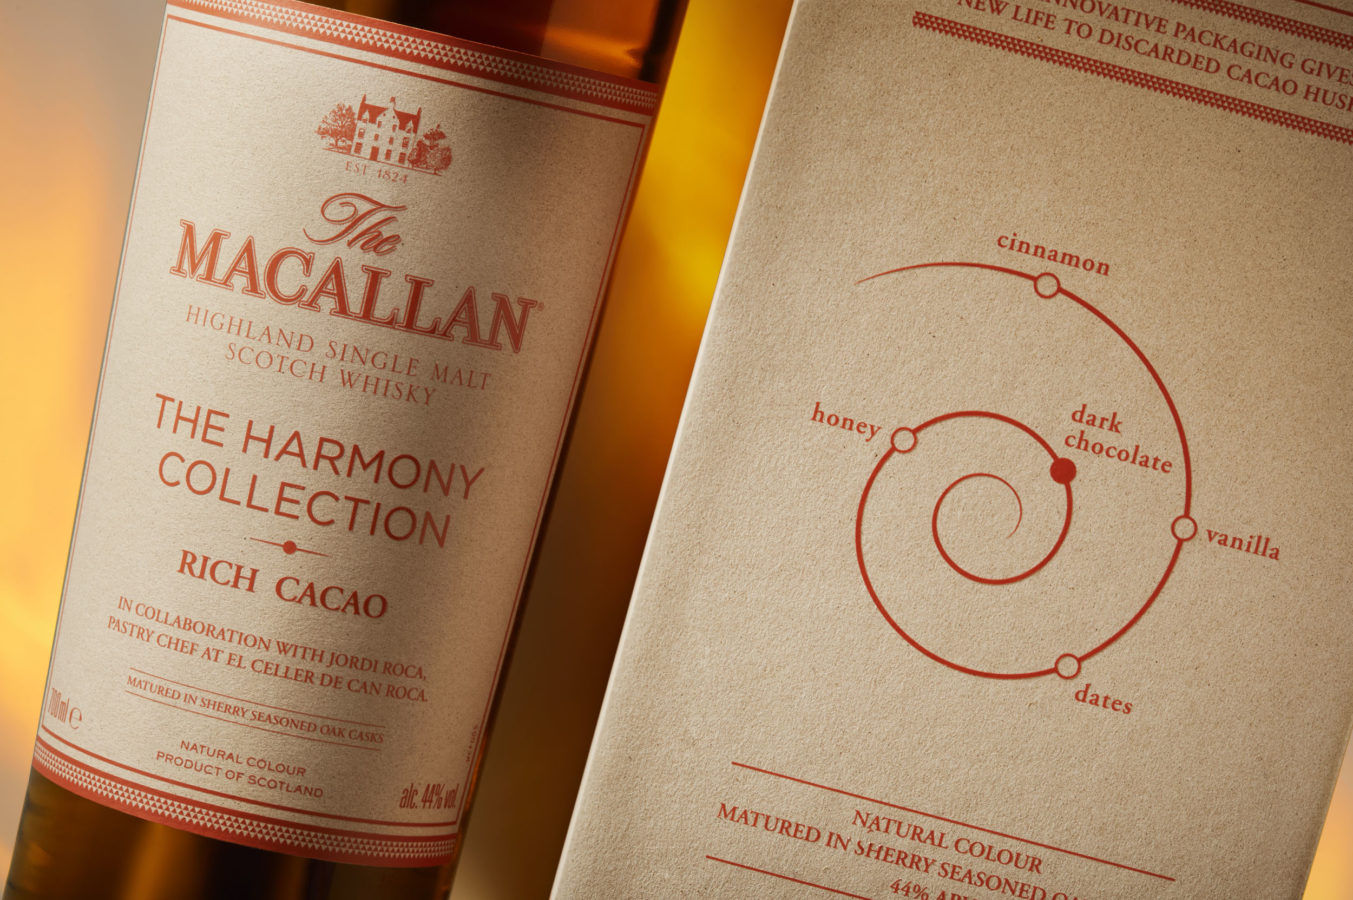 The Macallan Harmony Collection marks the brand’s journey towards sustainable packaging